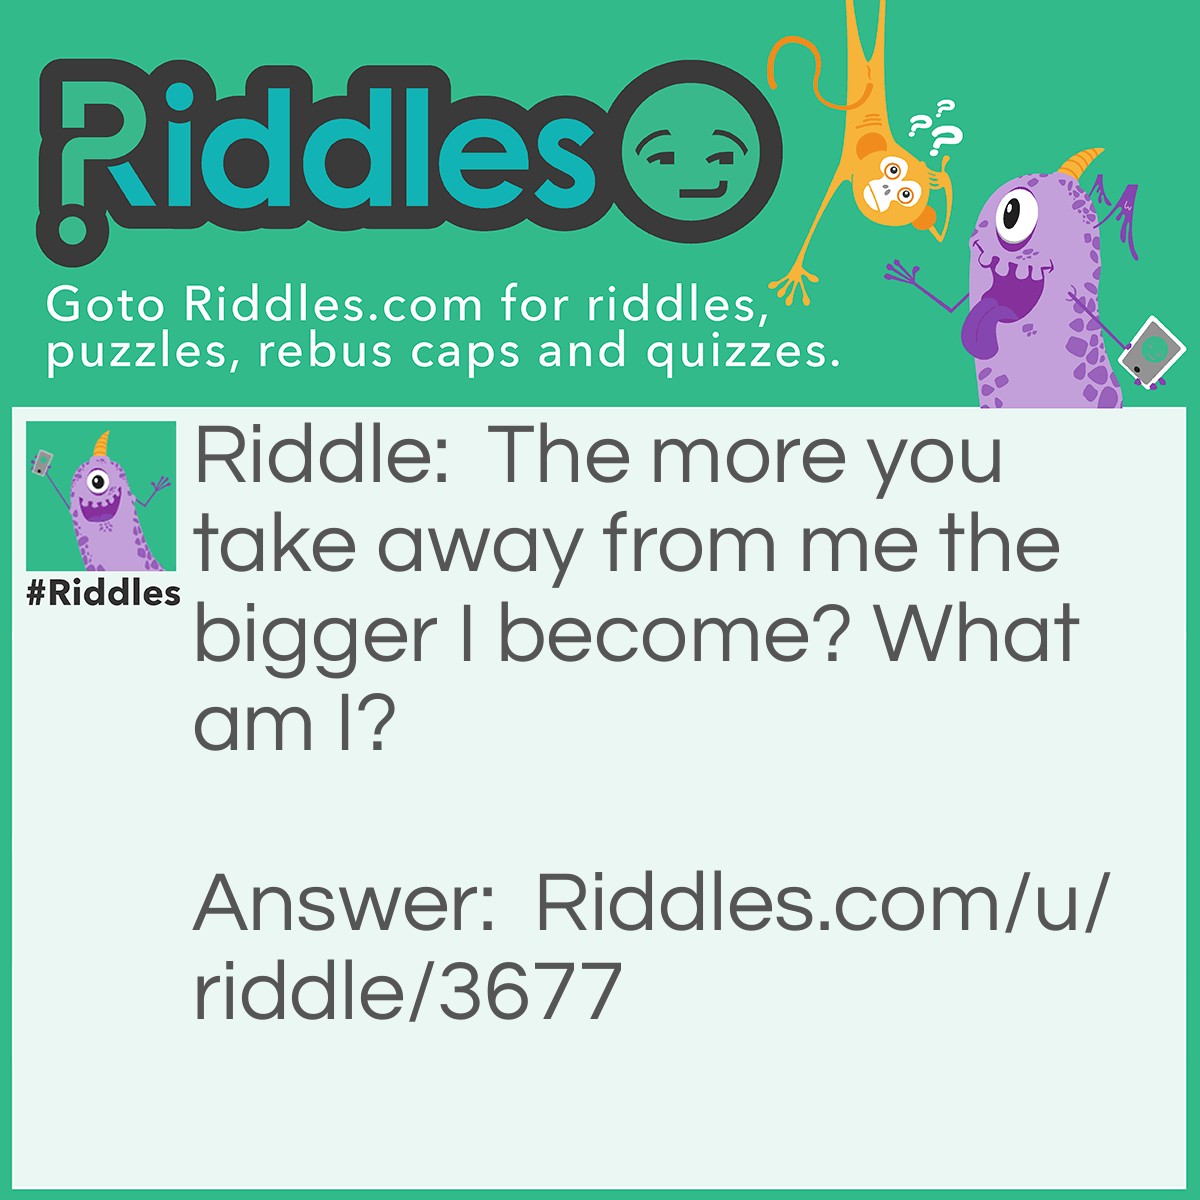 Riddle: The more you take away from me the bigger I become? What am I? Answer: A hole.